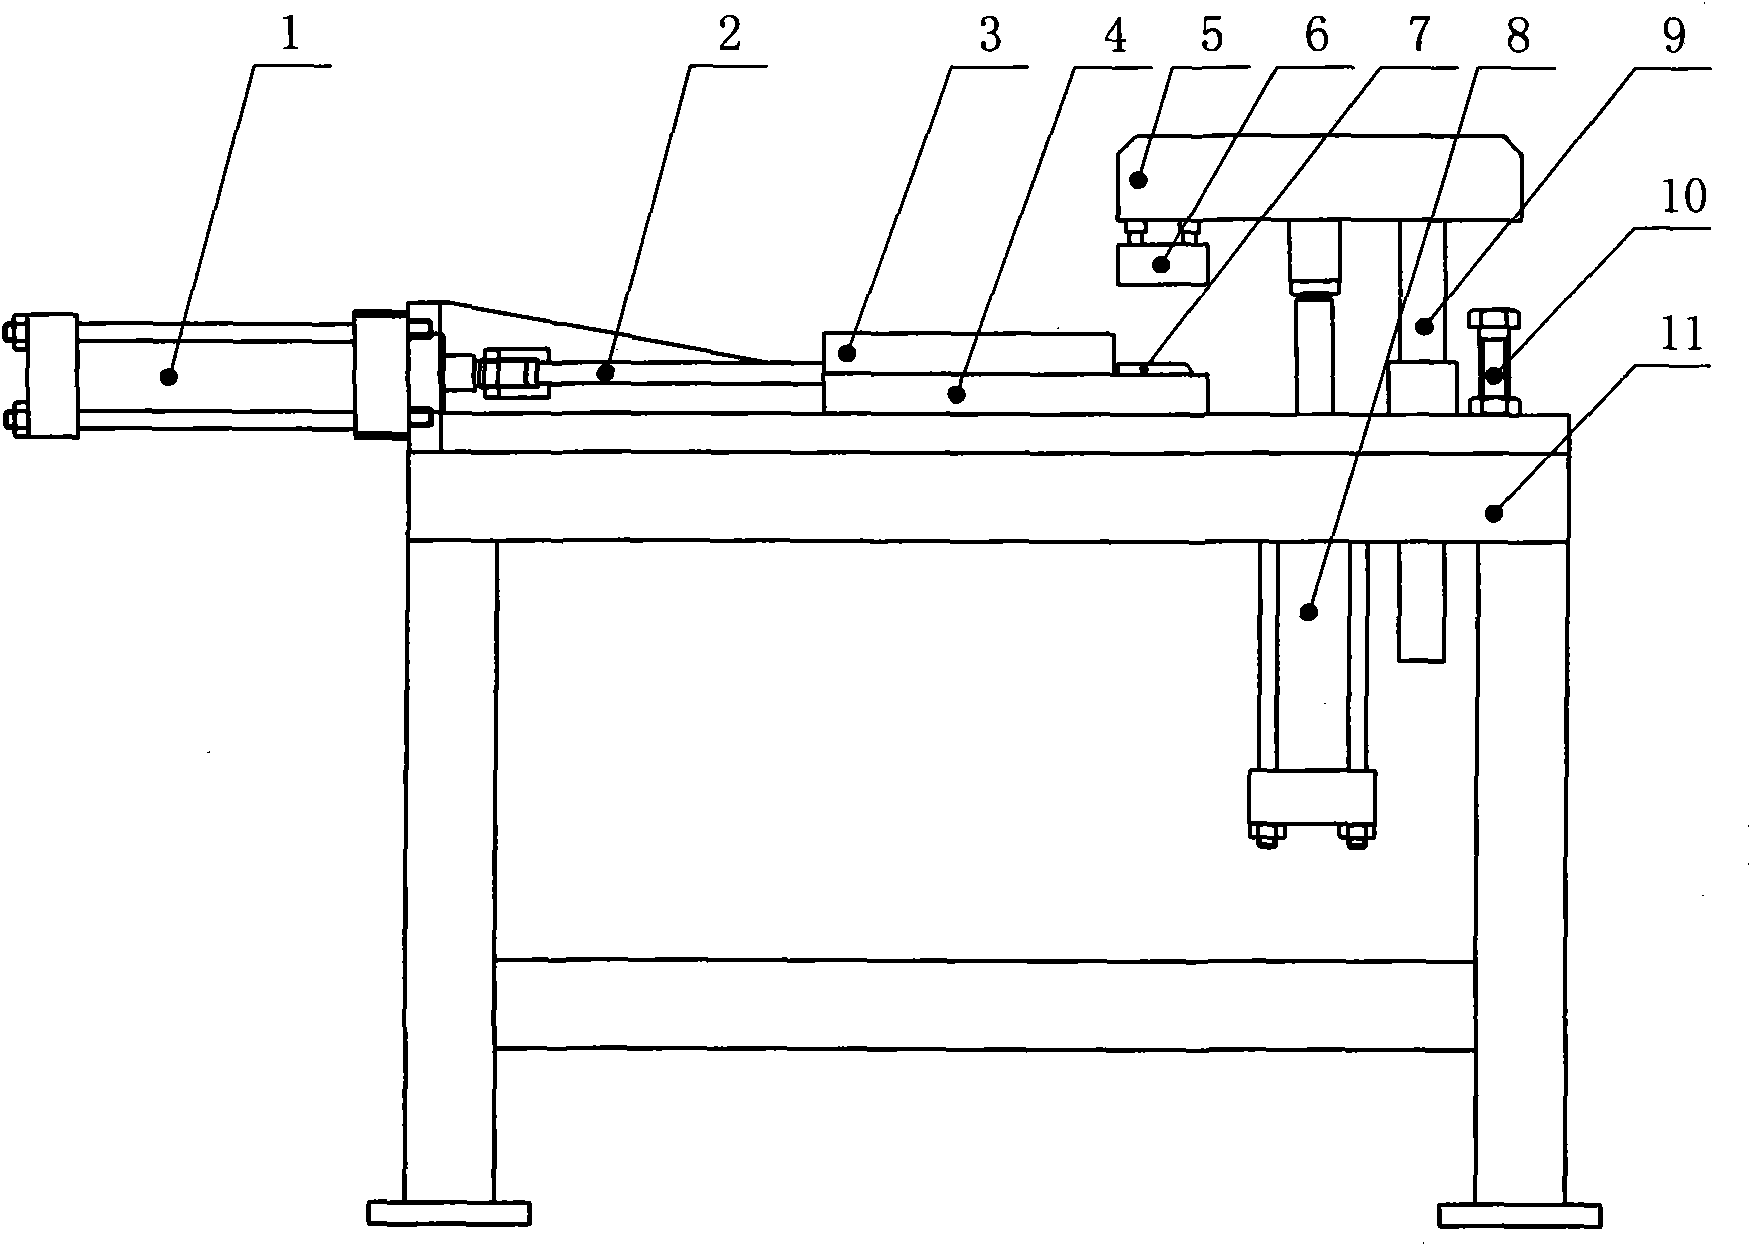 Inner diameter finishing machine tool of small-size connecting bend